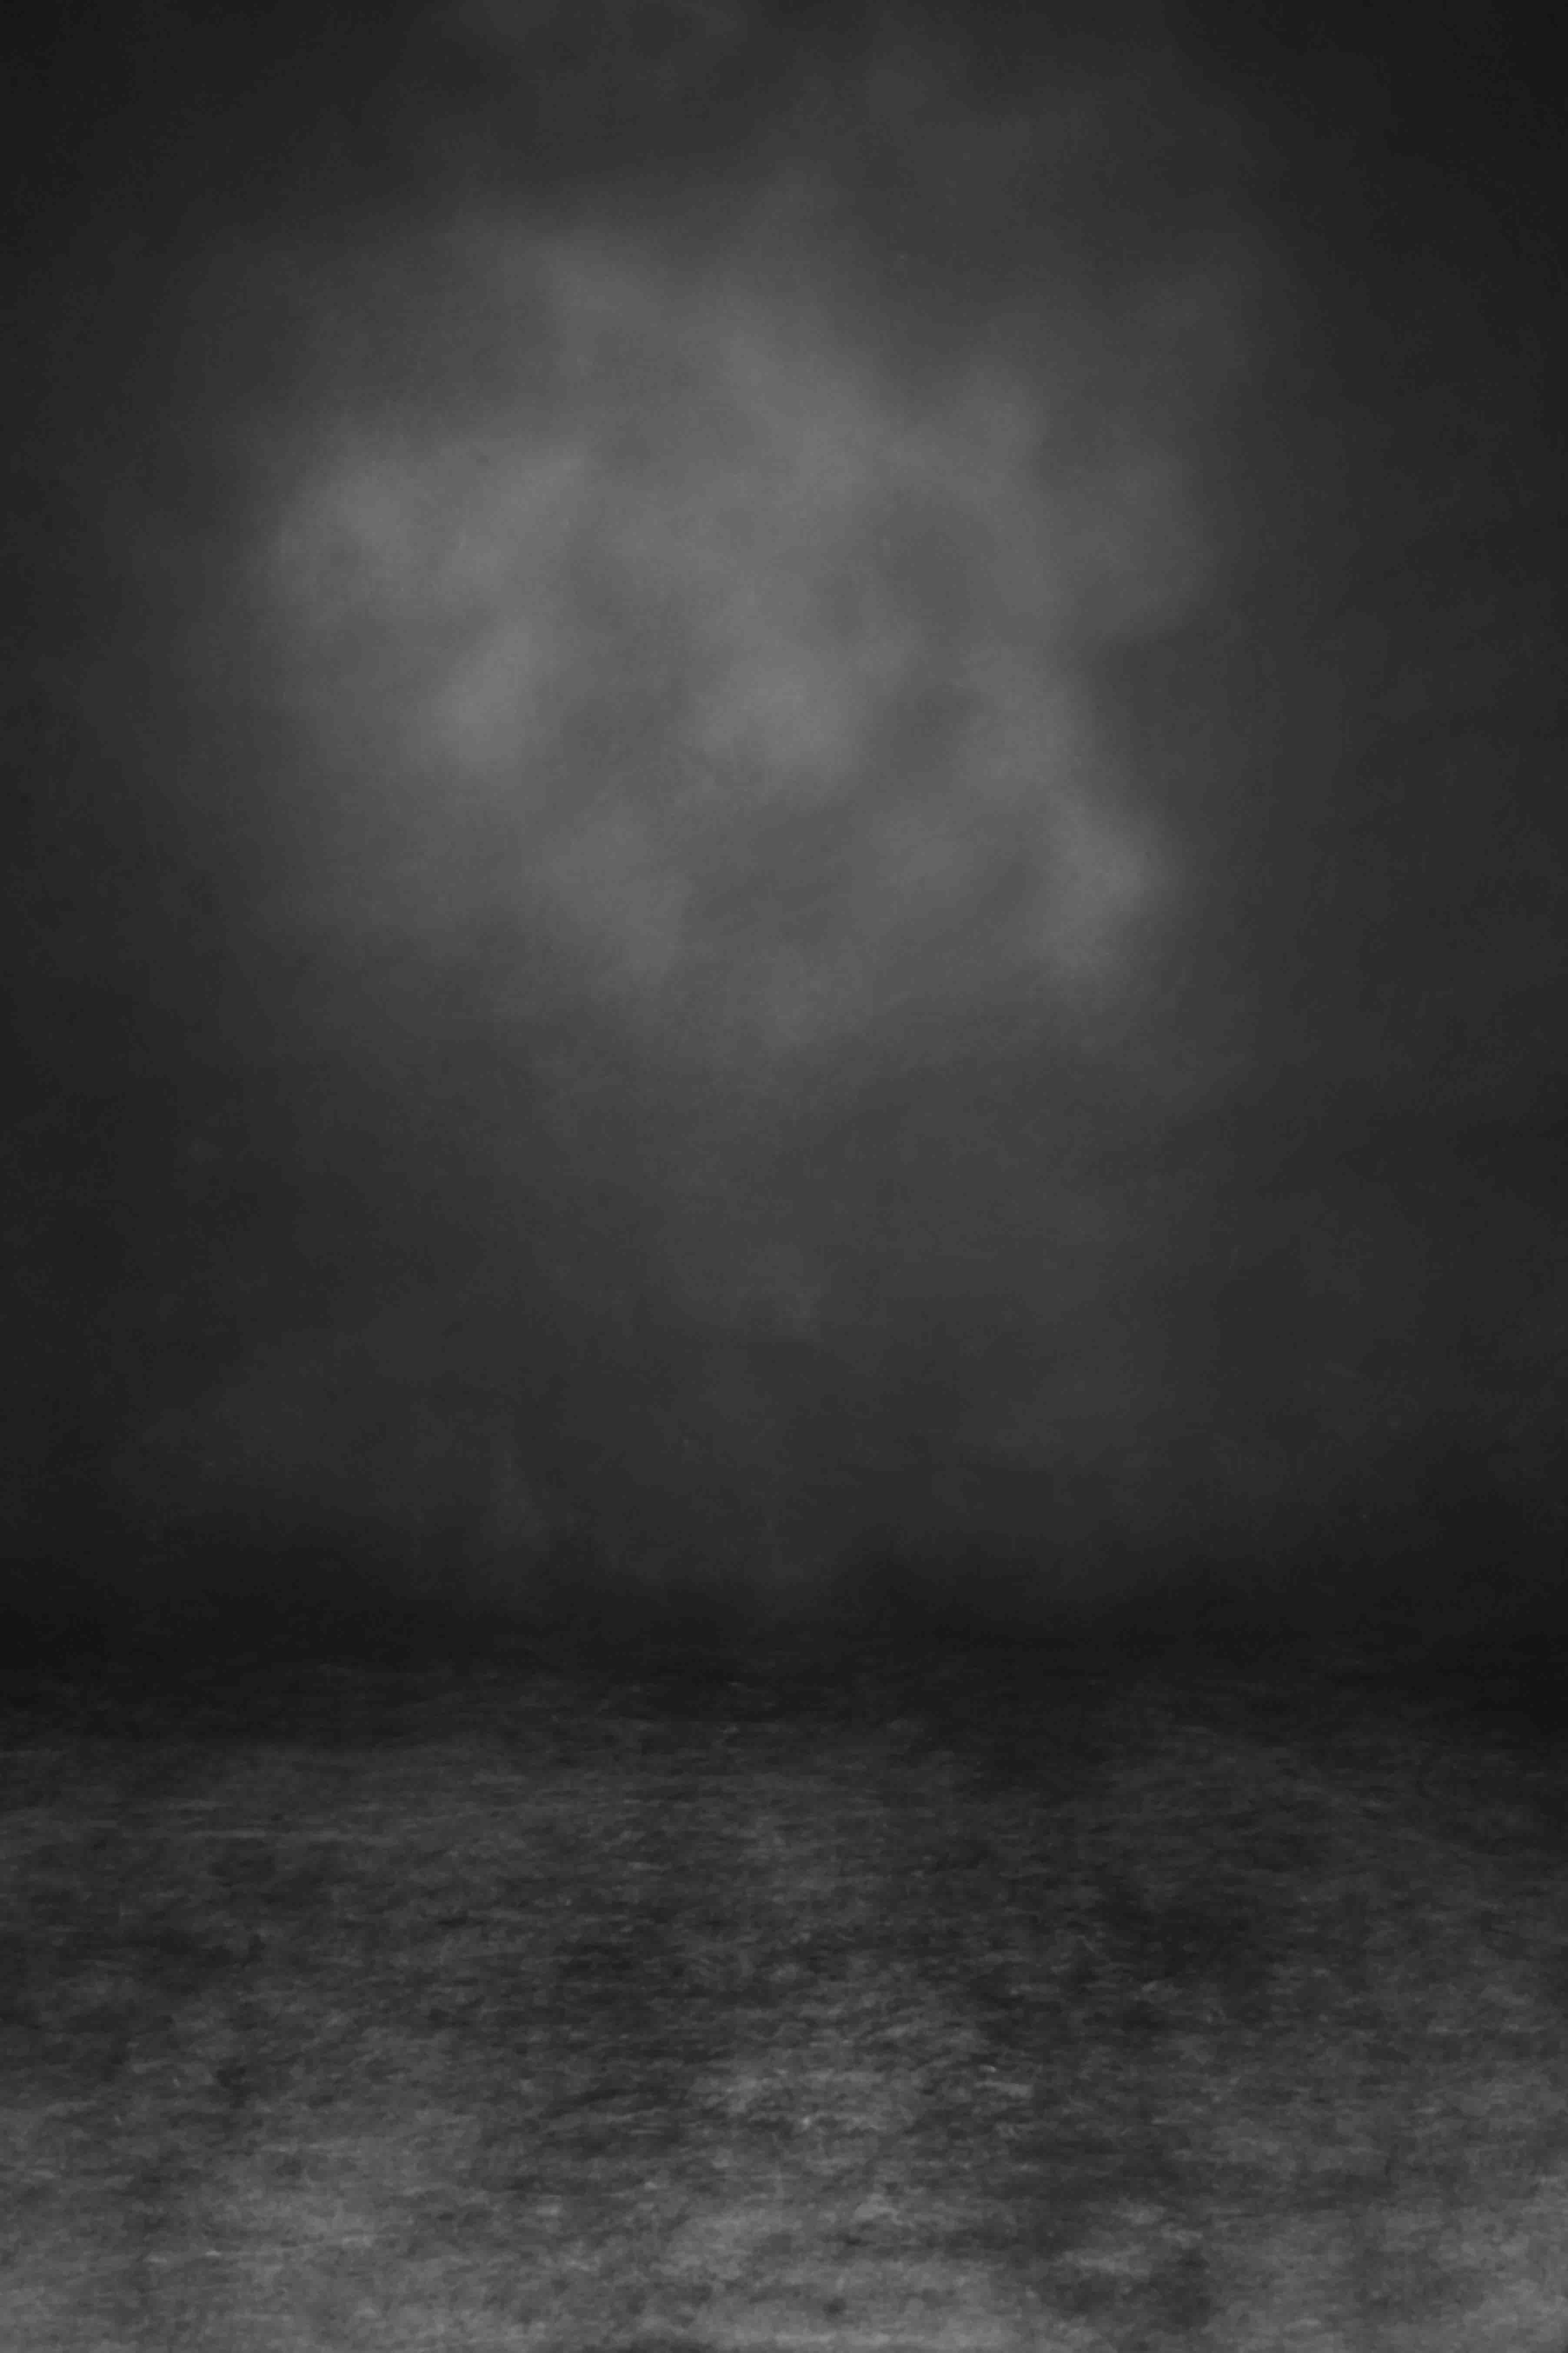 Abstract Warm Black With Gray In Center Backdrop For Photo Shopbackdrop